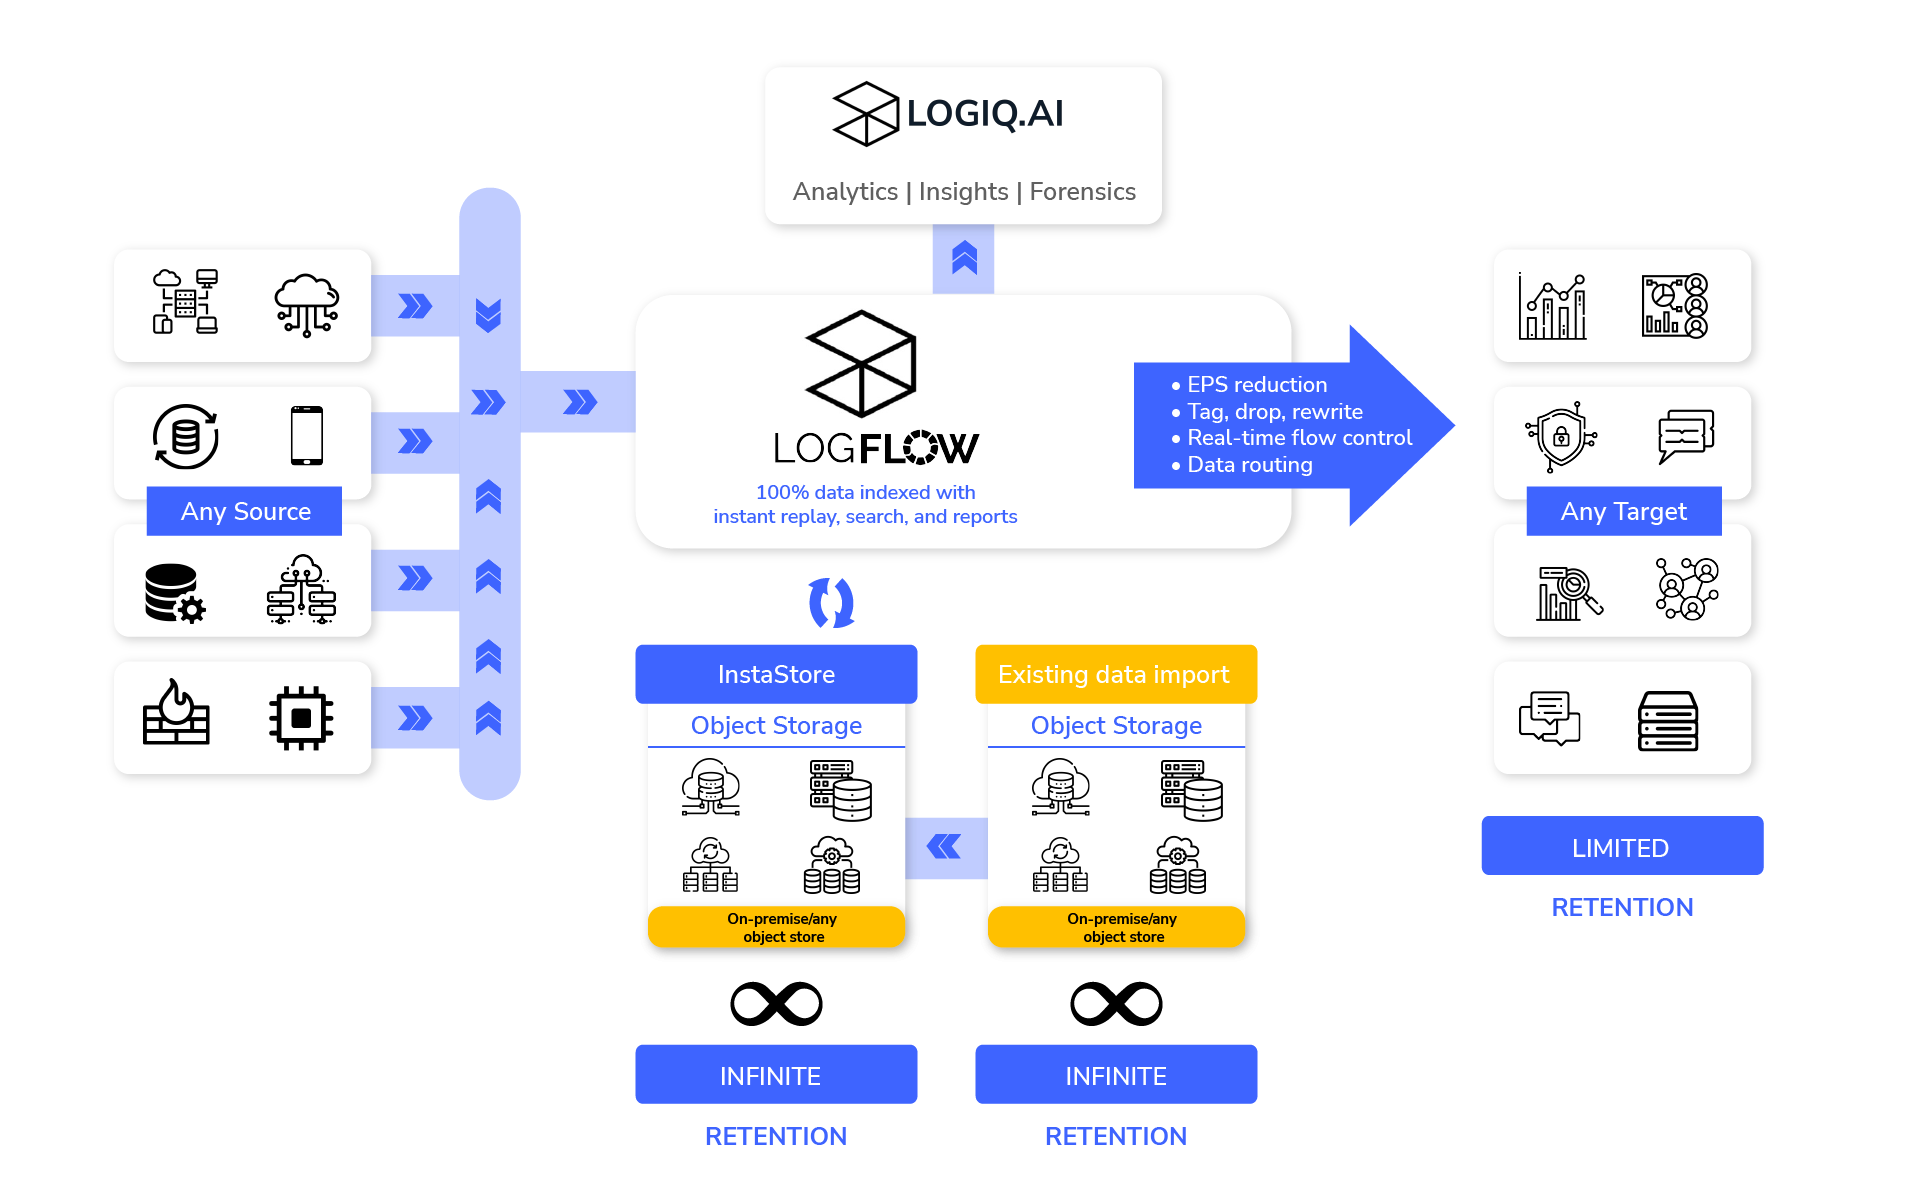 LOGIQ.AI, a leading provider of data management, analytics, and observability solutions for IT, DevOps, and SecOps teams, has launched LogFlow, an Observability Data Pipeline as a Service (DPaaS).